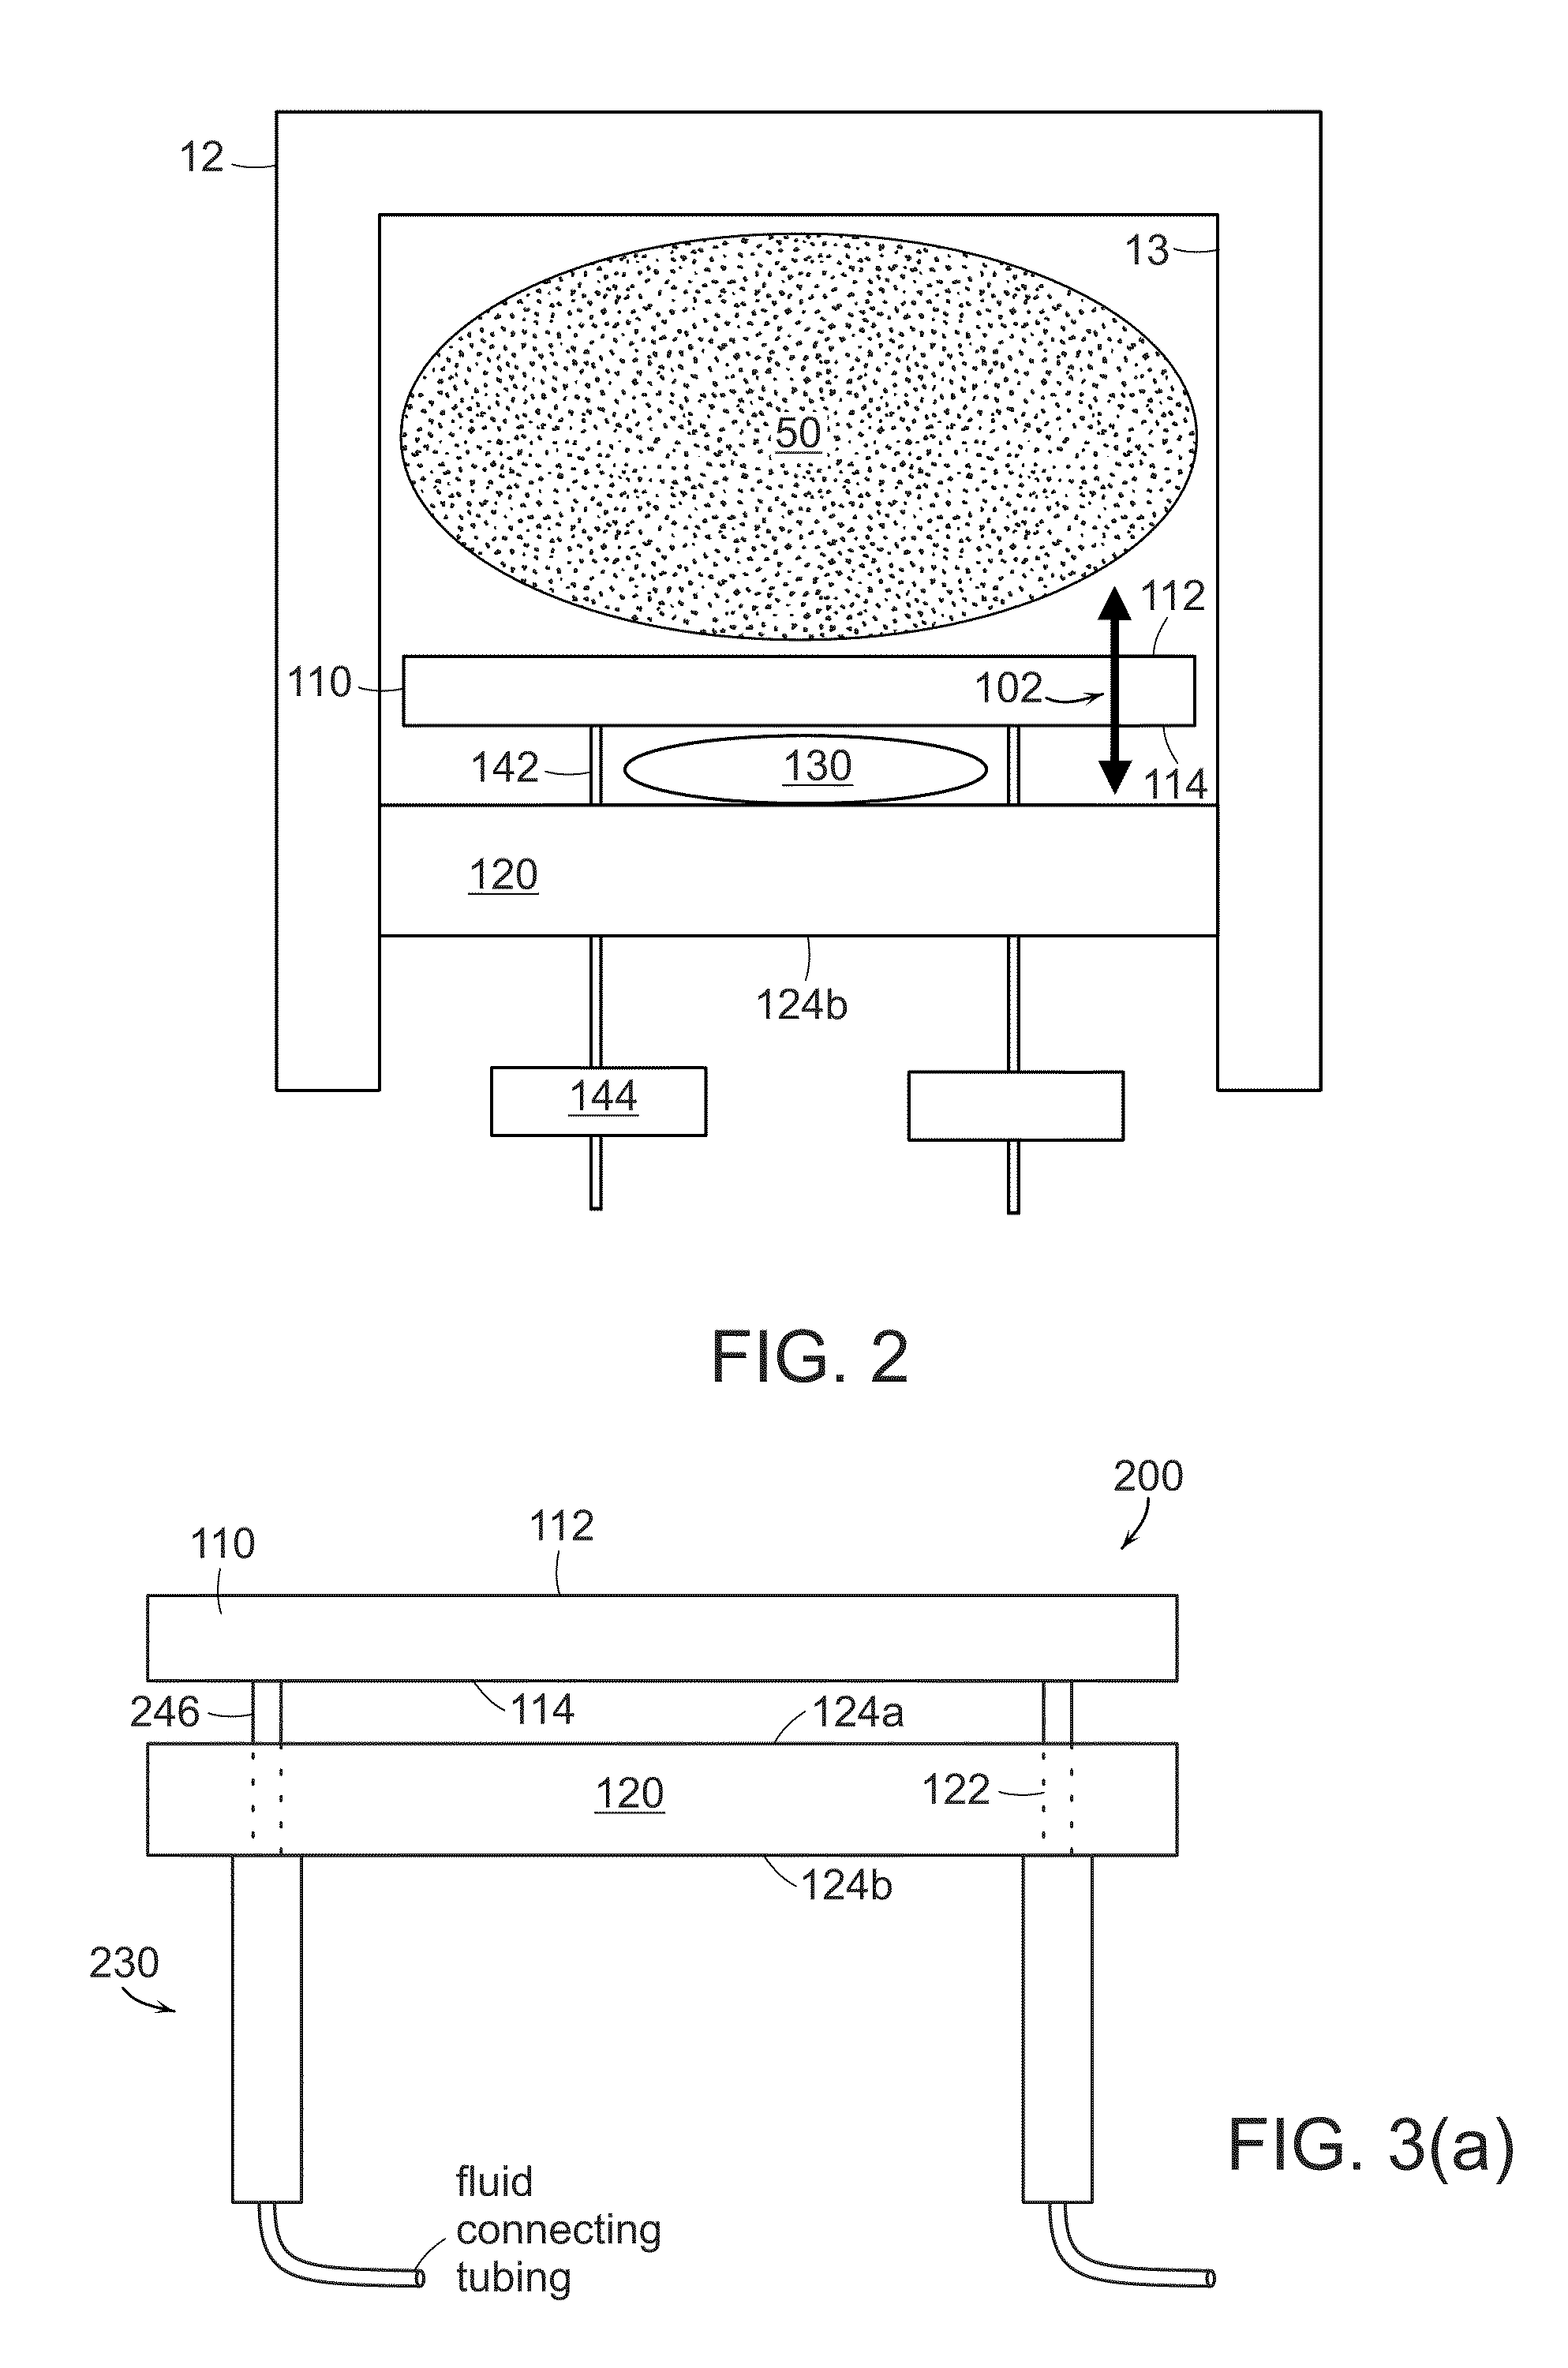 Compression device for enhancing normal/abnormal tissue contrast in MRI including devices and methods related thereto